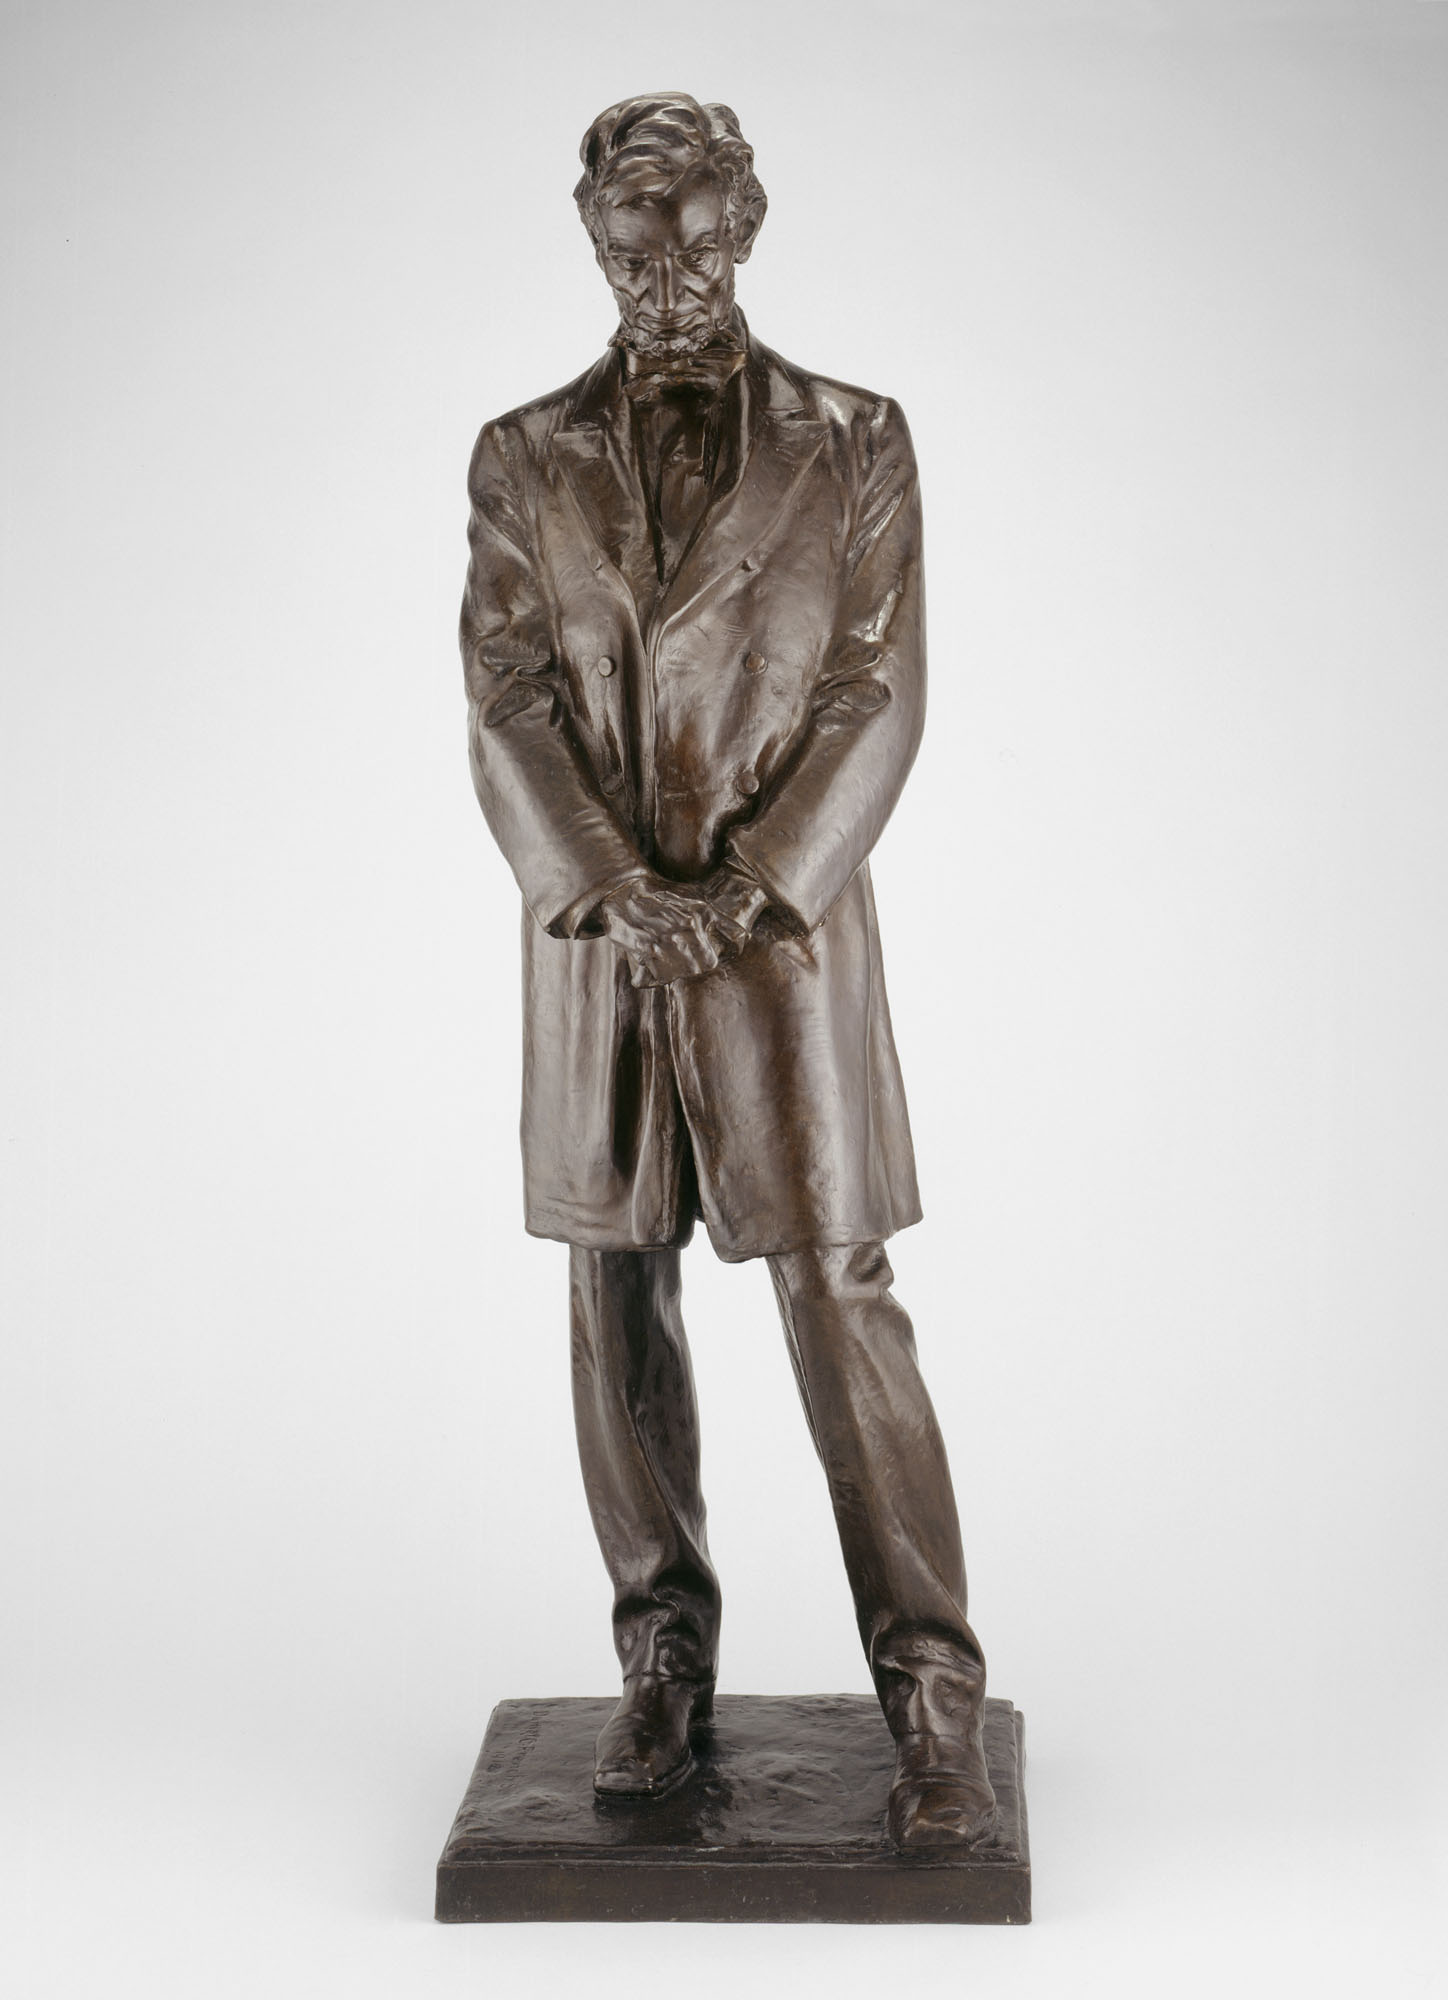 Daniel Chester French, <em>Abraham Lincoln</em>, 1912 (modeled in 1912, cast after 1912), bronze (The Art Institute of Chicago) 